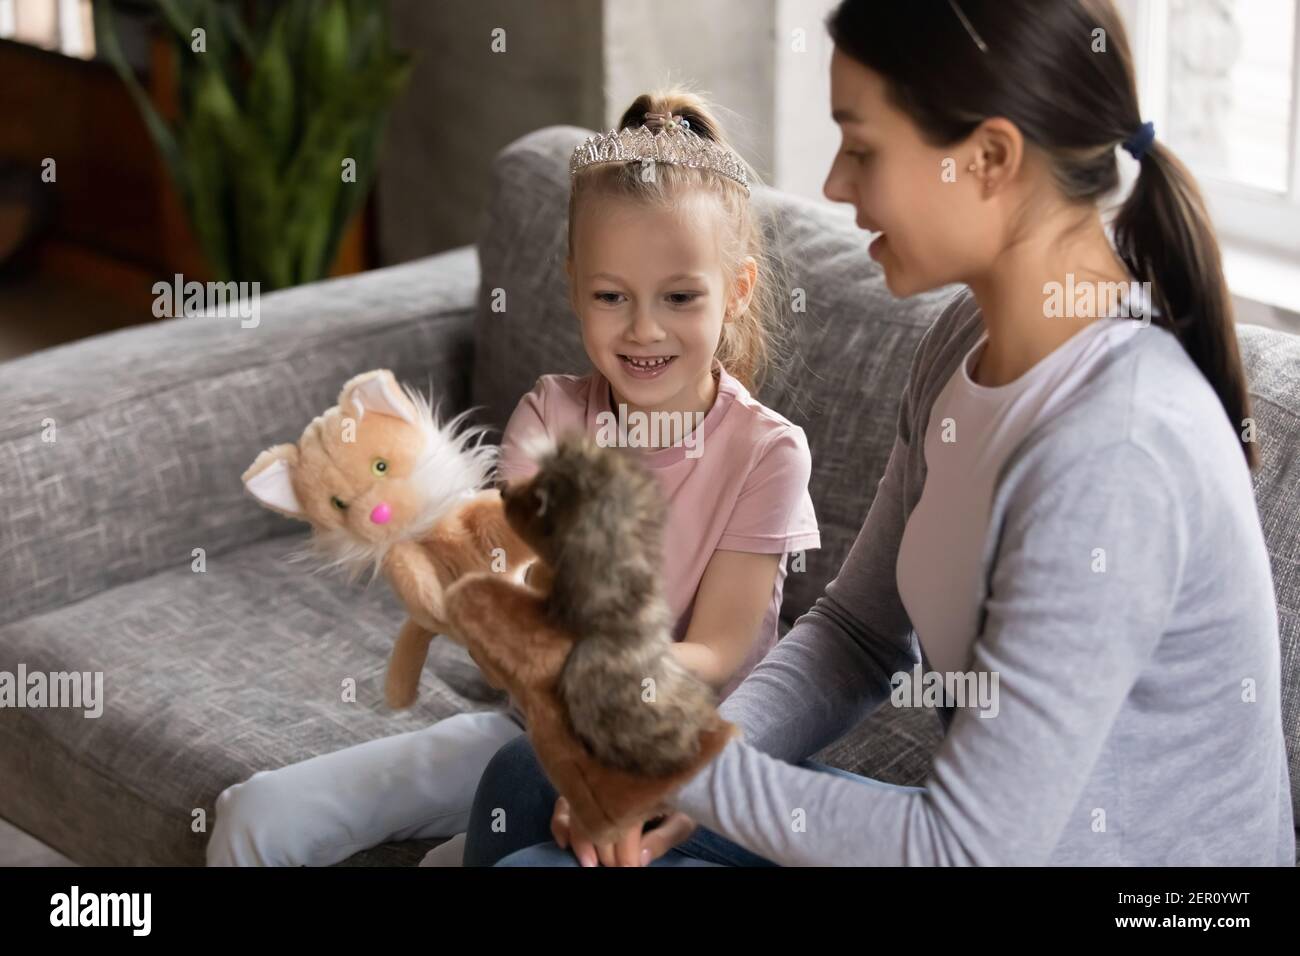 Happy mom and excited daughter girl wearing princess tiara Stock Photo